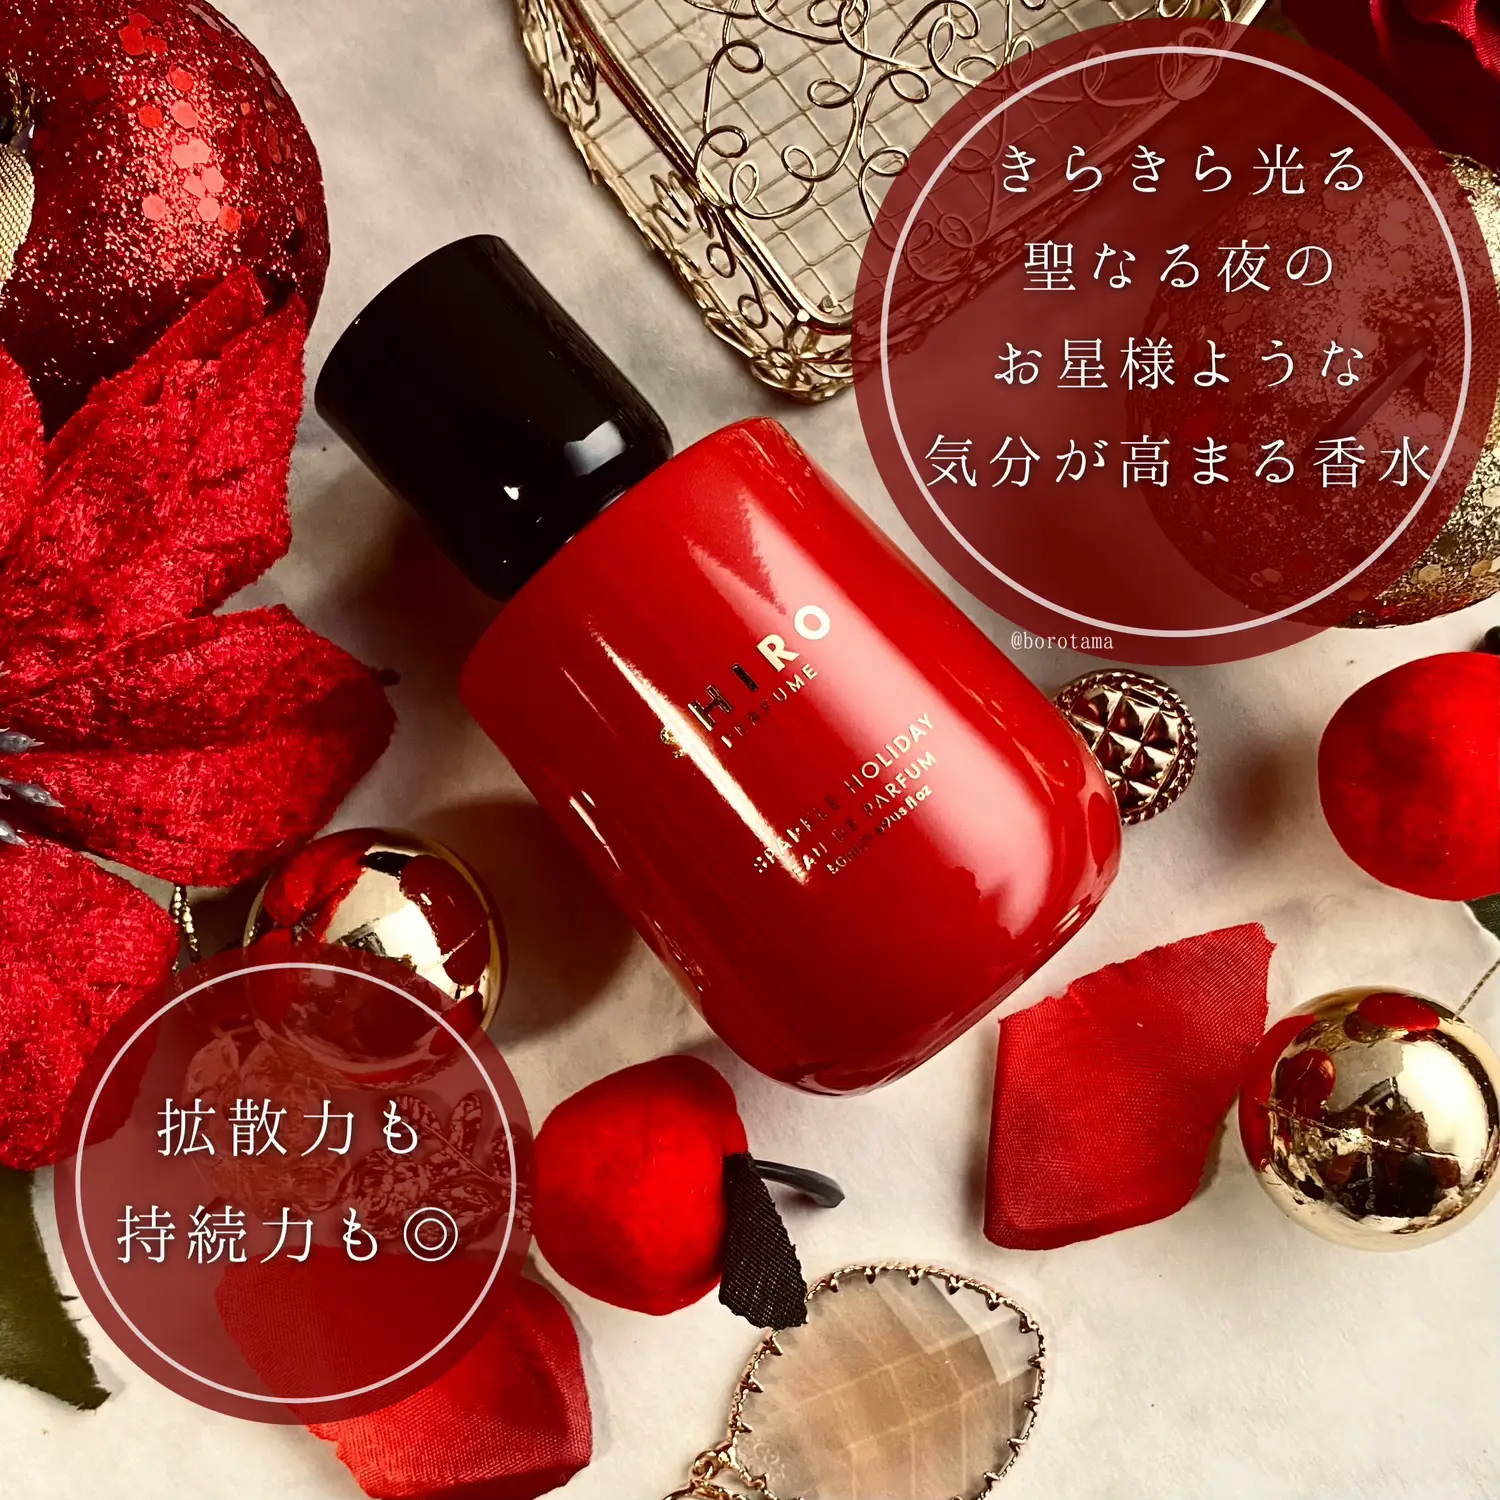 🍎2023 HOLIDAY HOLY APPLE PERFUME🍎 | Gallery posted by borotama